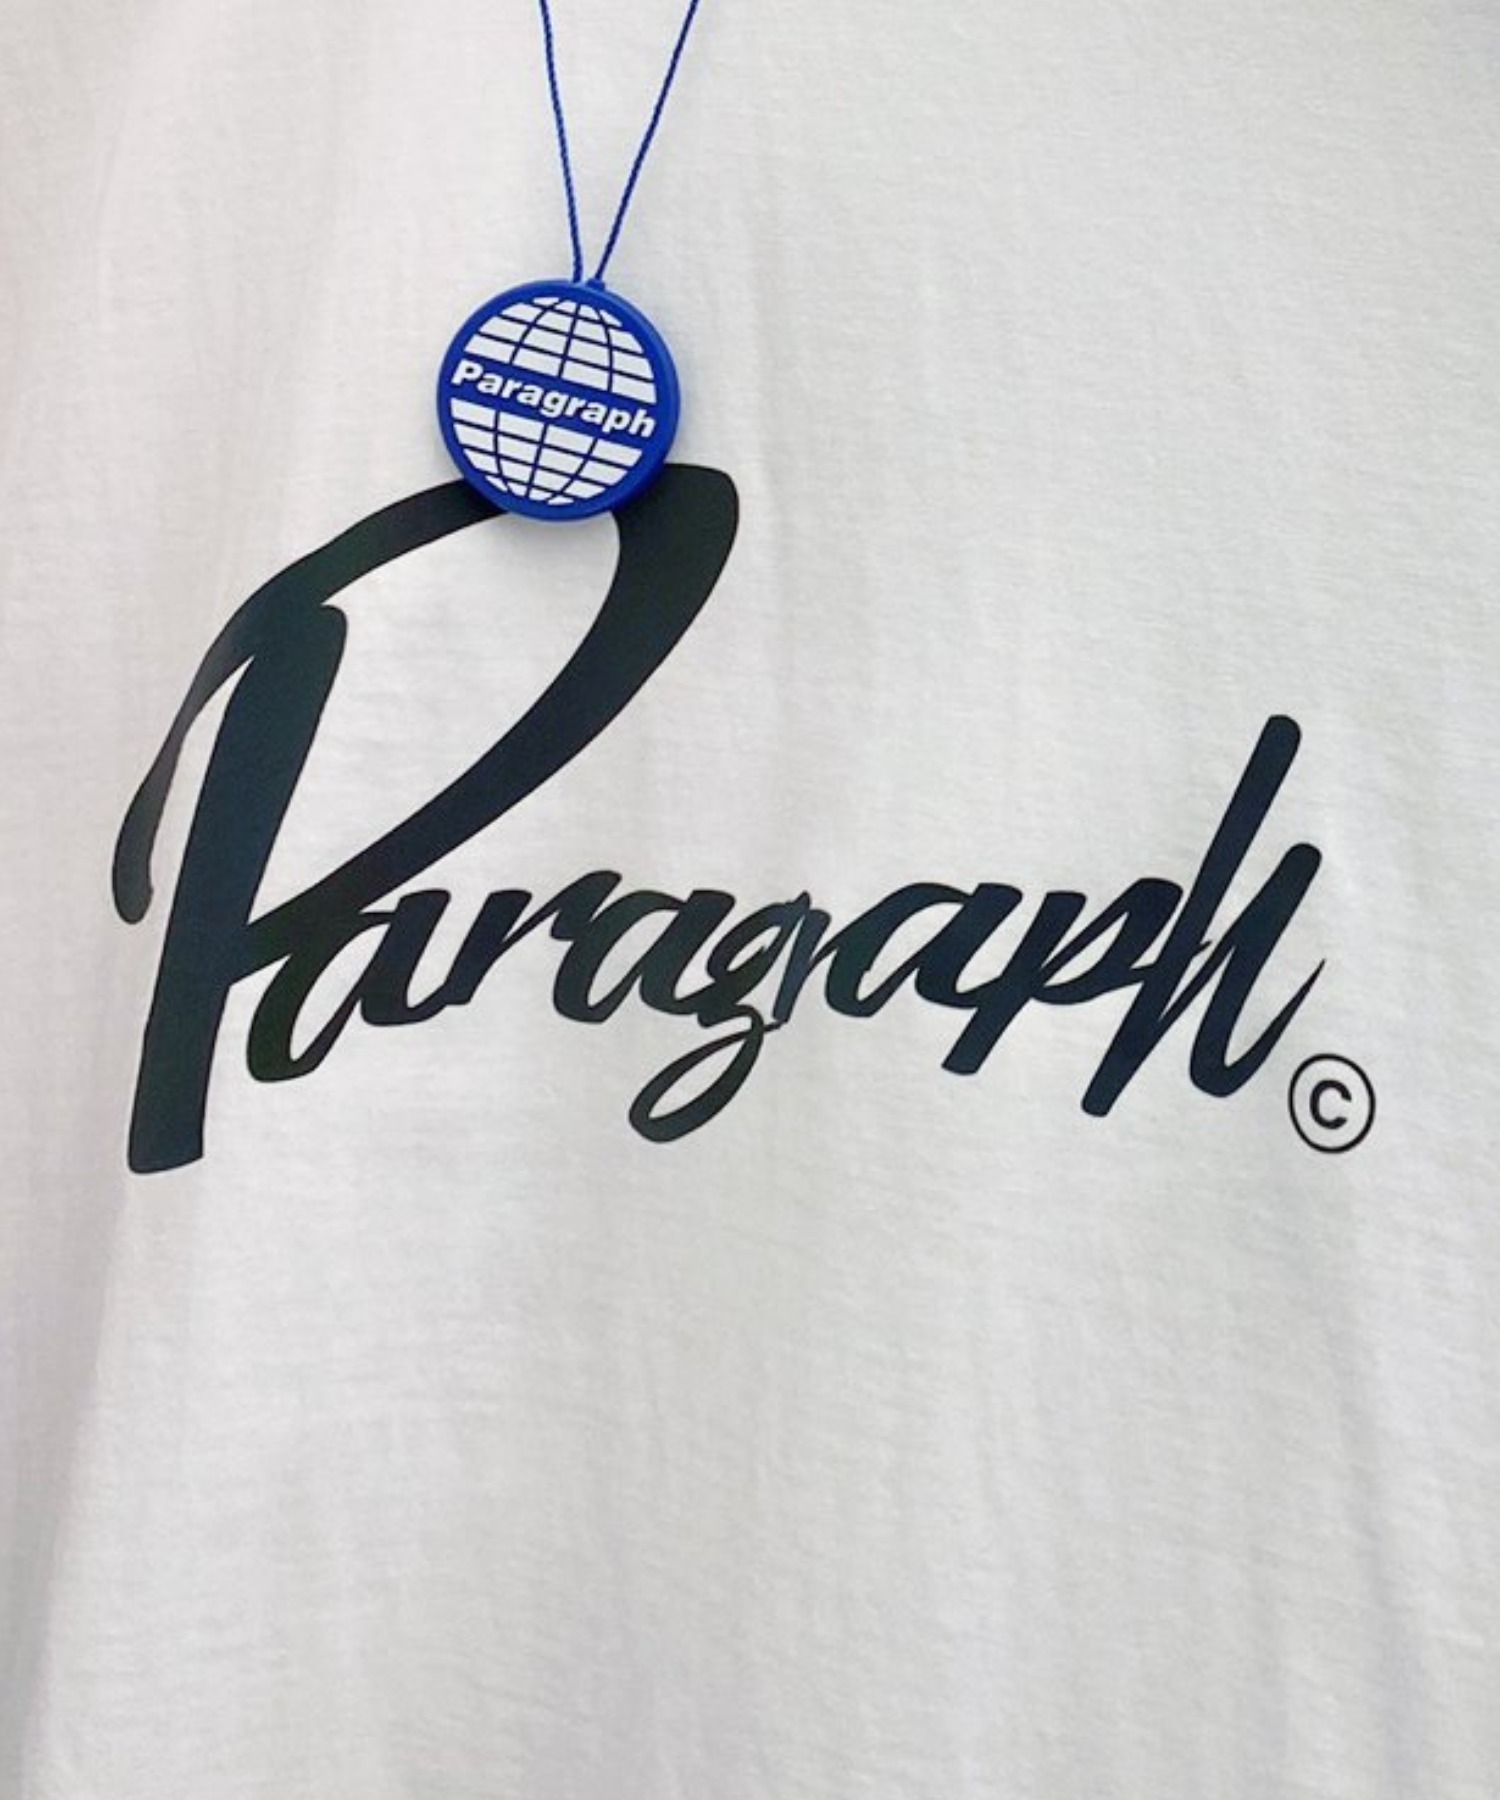 paragraph/パラグラフ』SCOTCH HIGH FREQUENCY T-SHIRT/カーシブ